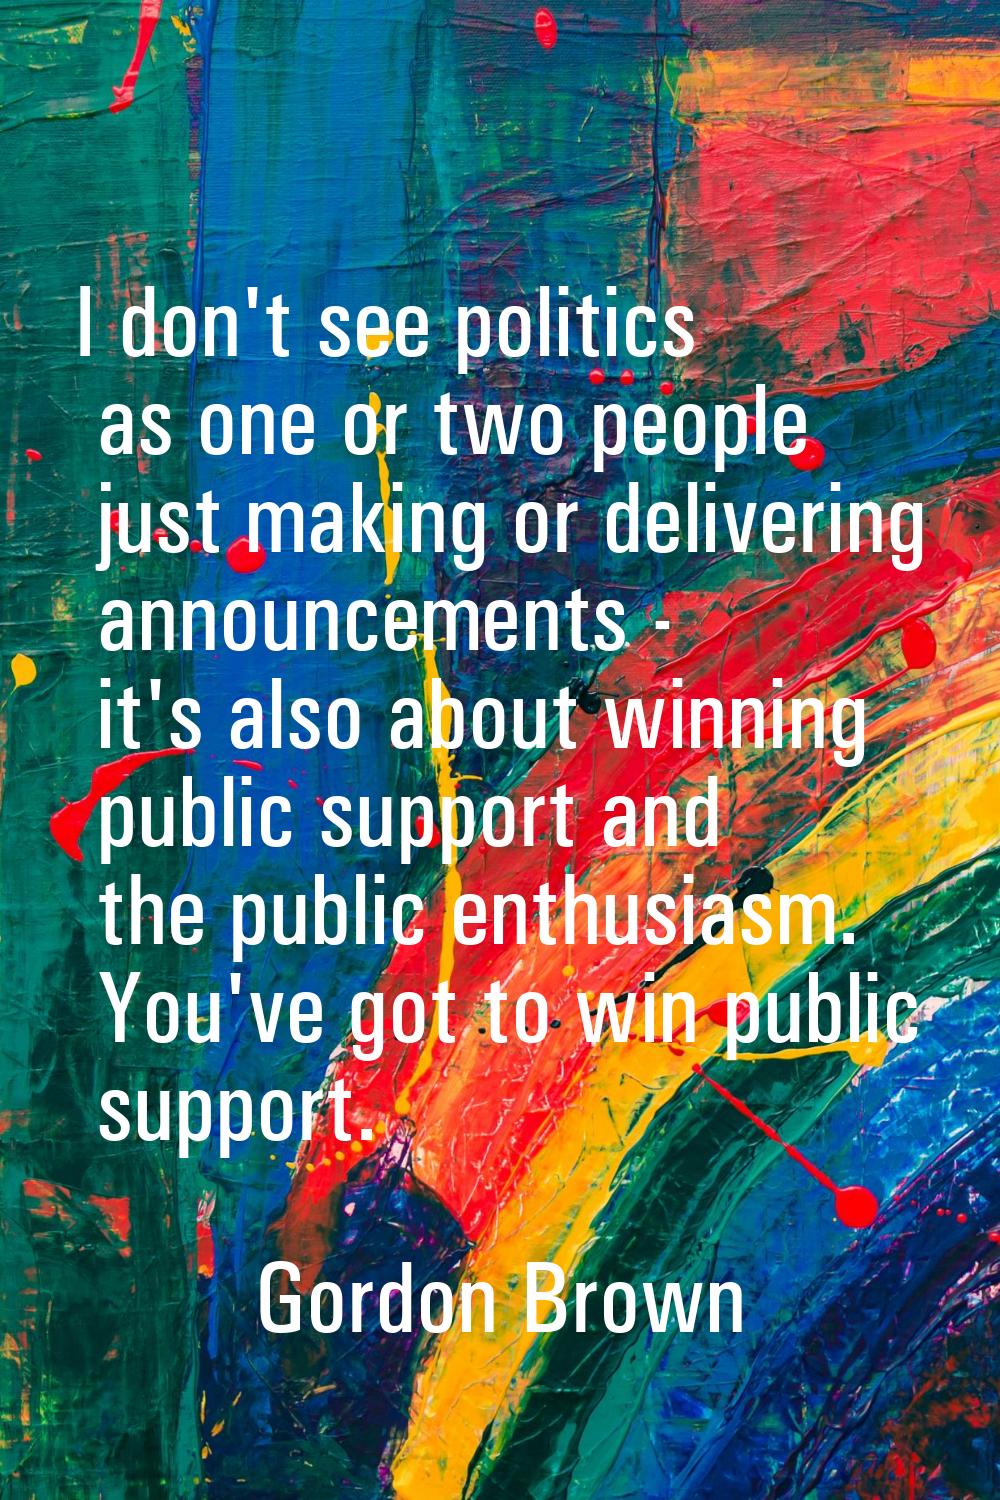 I don't see politics as one or two people just making or delivering announcements - it's also about